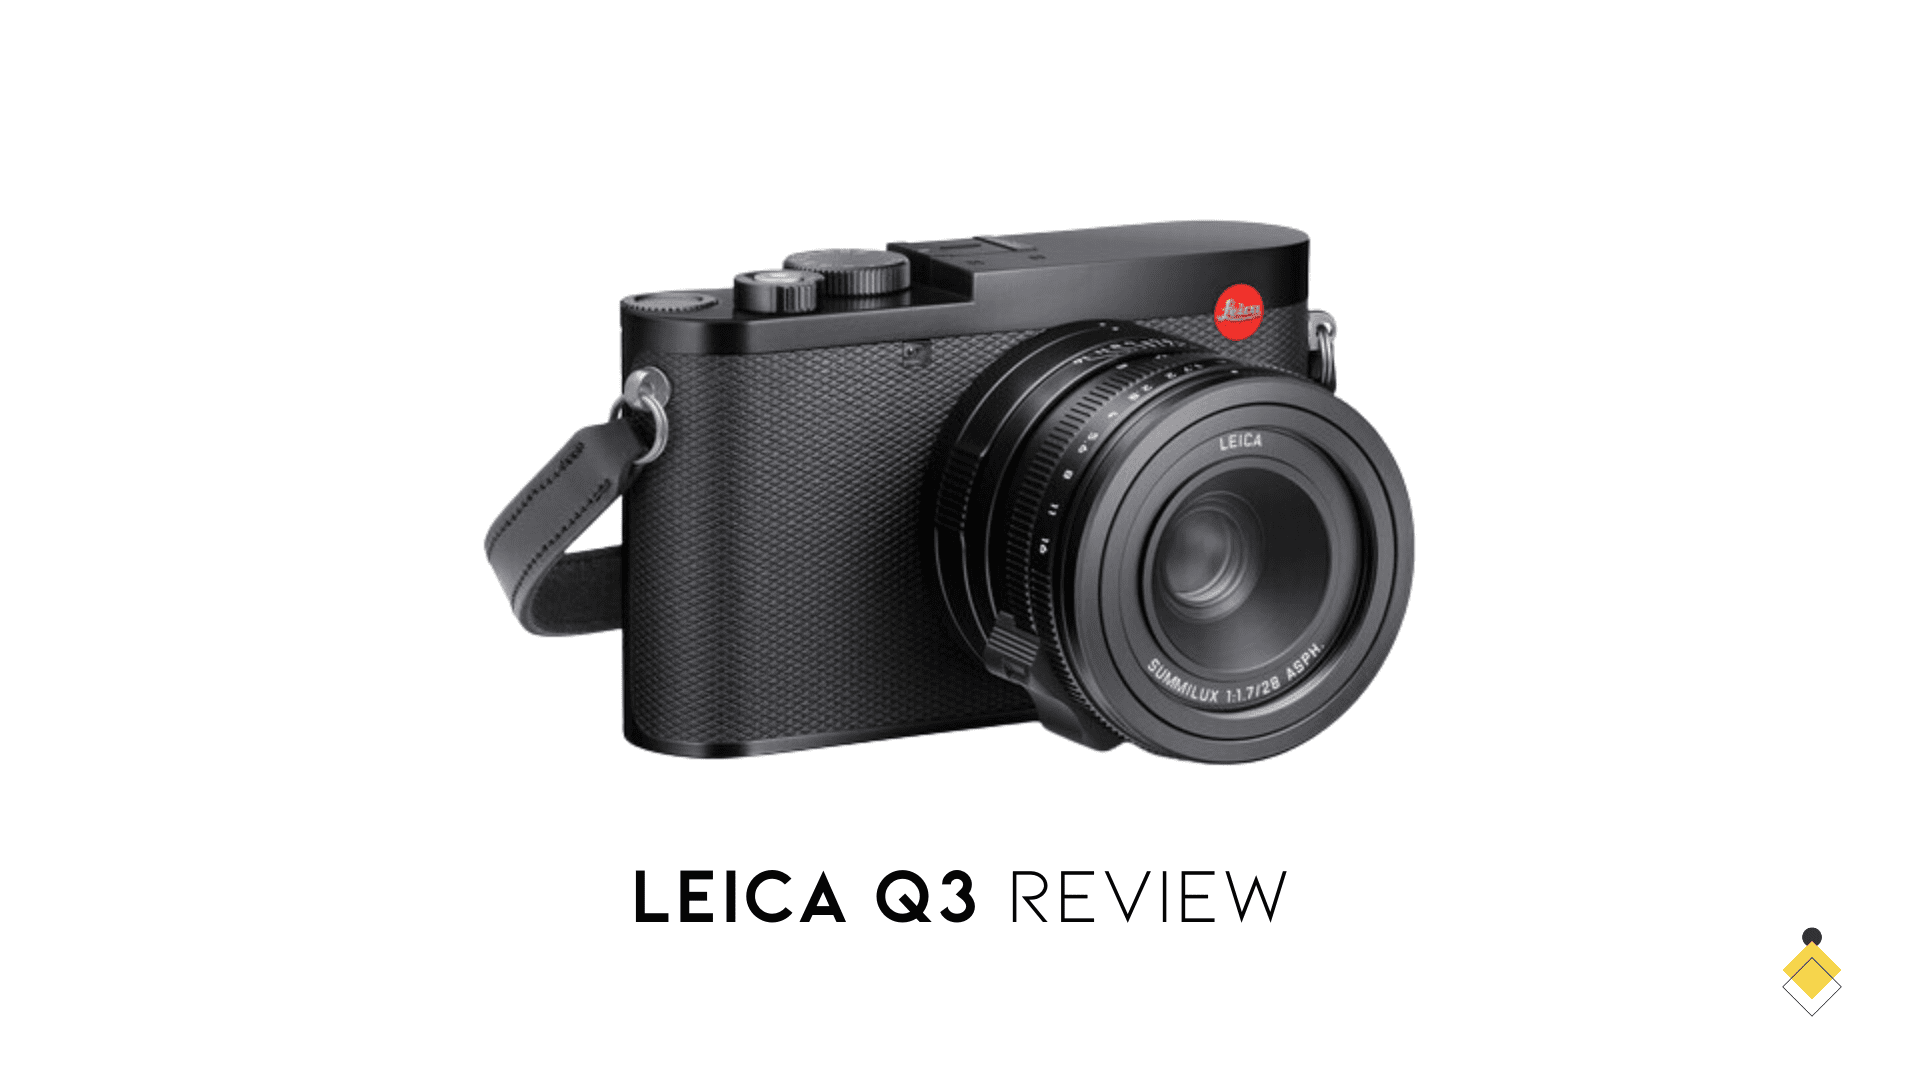 Leica Q3 Review: Our Experience with The New Leica Camera